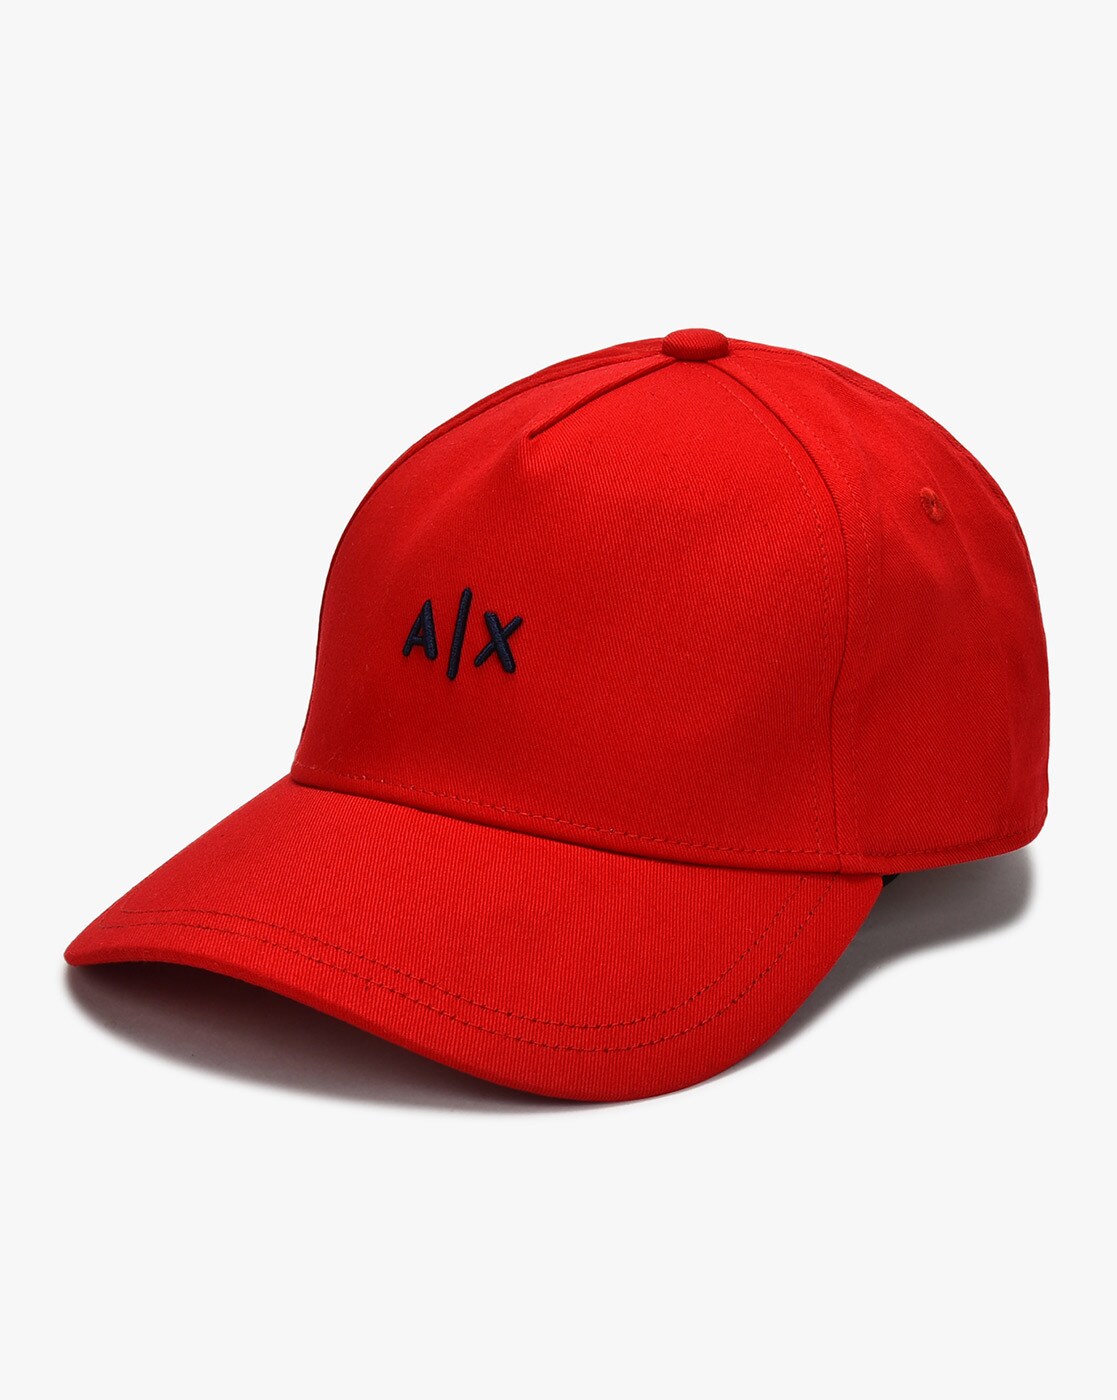 Buy Red Caps & Hats for Men by ARMANI EXCHANGE Online 